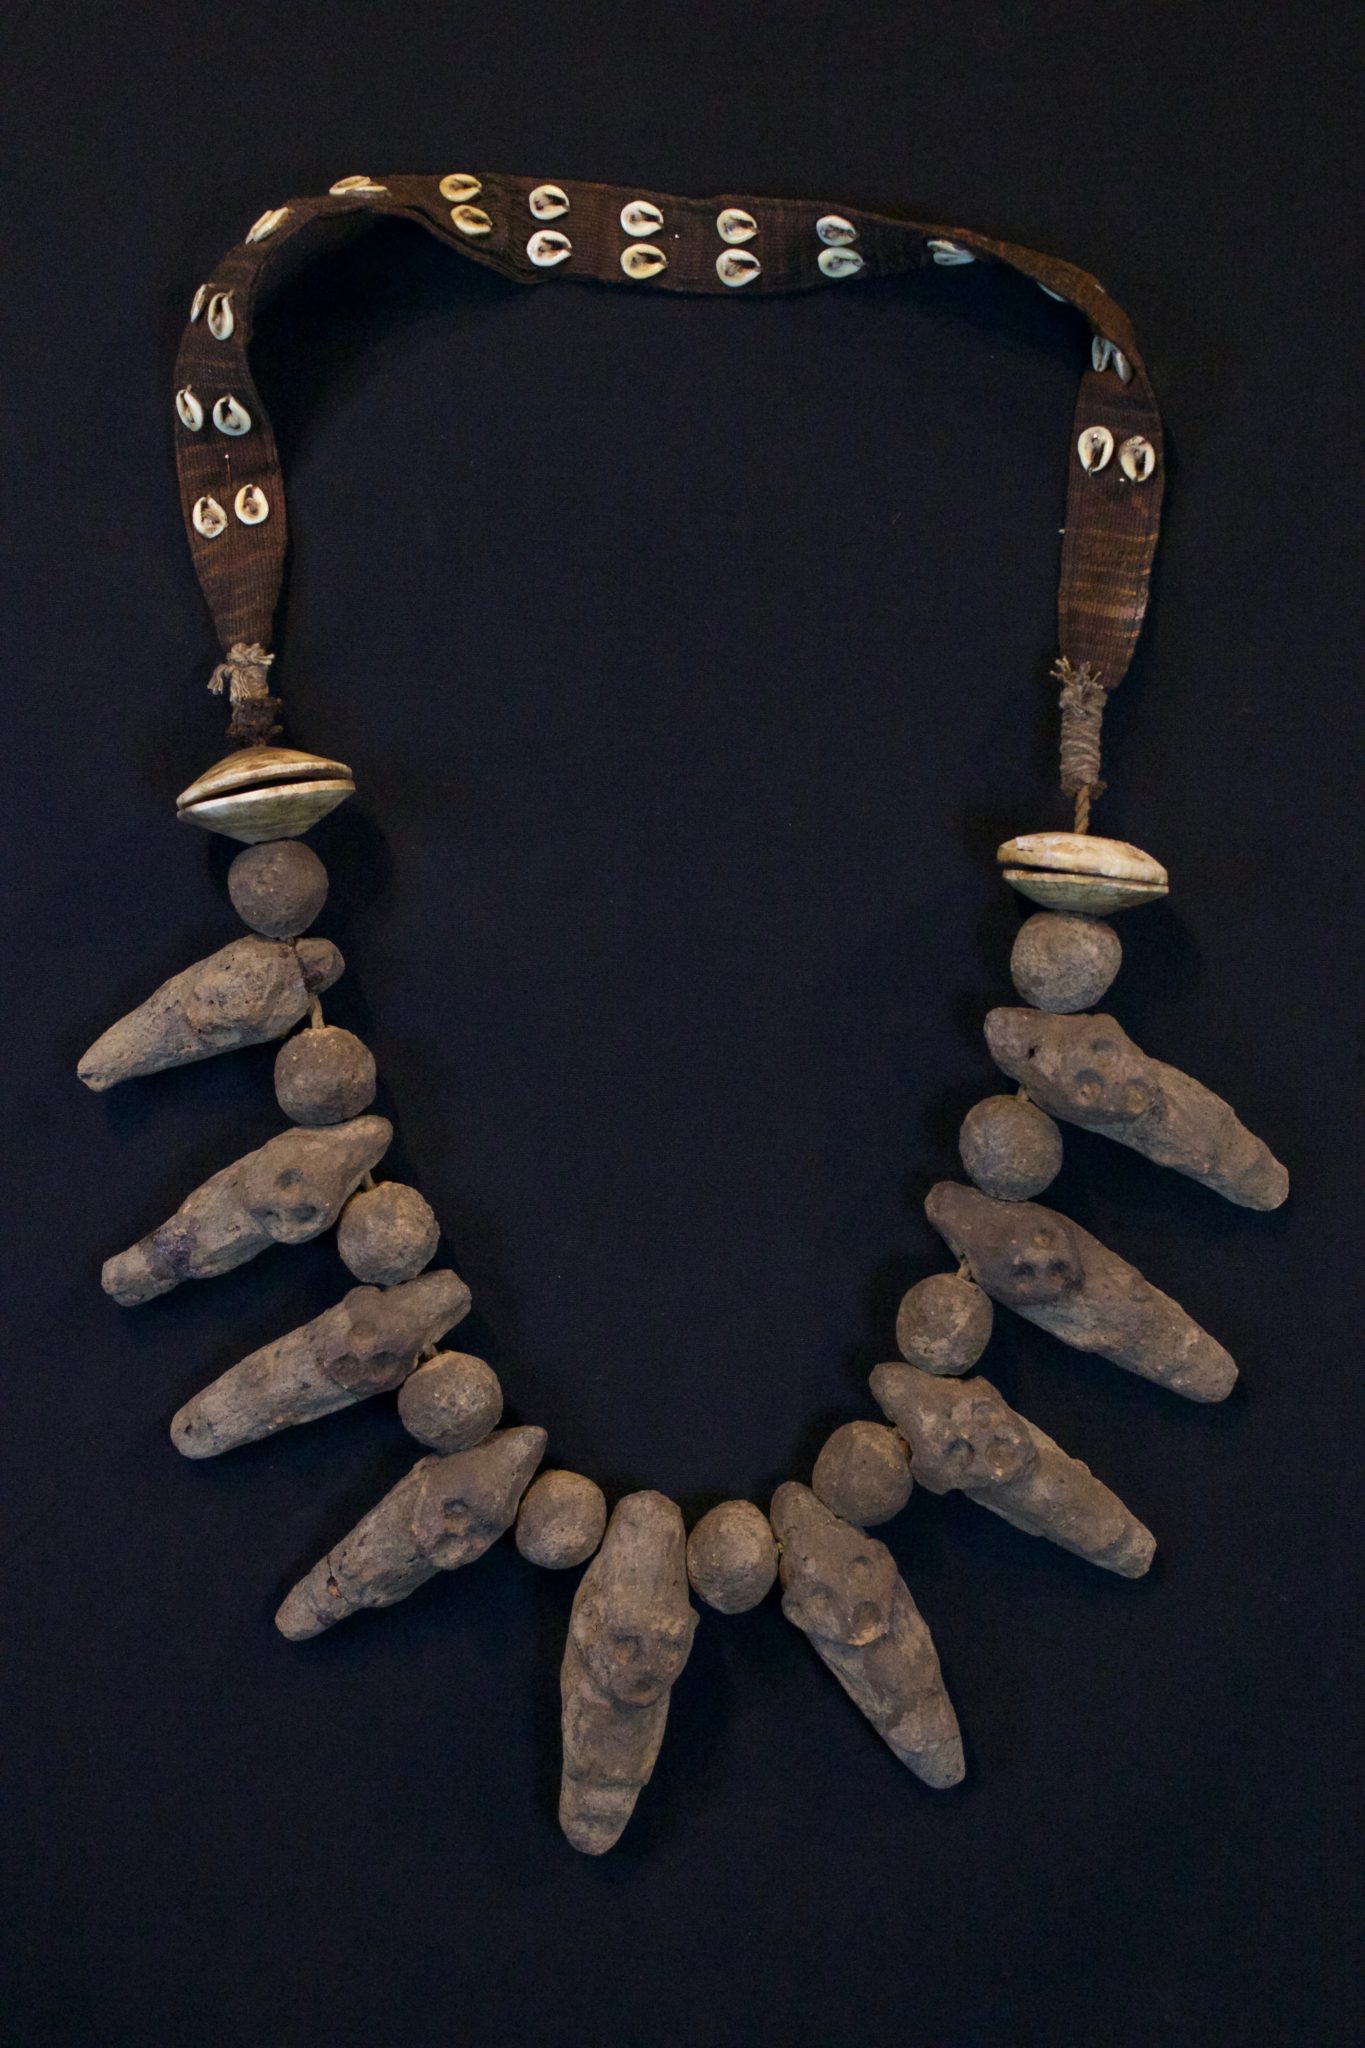 Shaman Amulet Necklace, Timor Island, Lesser Sunda Islands, Indonesia, Early 20th c, Ceramic stone figures and beads, shell, cotton. Worn by the shaman for healing ceremonies. 20 ½” x 11” x 1 ¾”, $650.